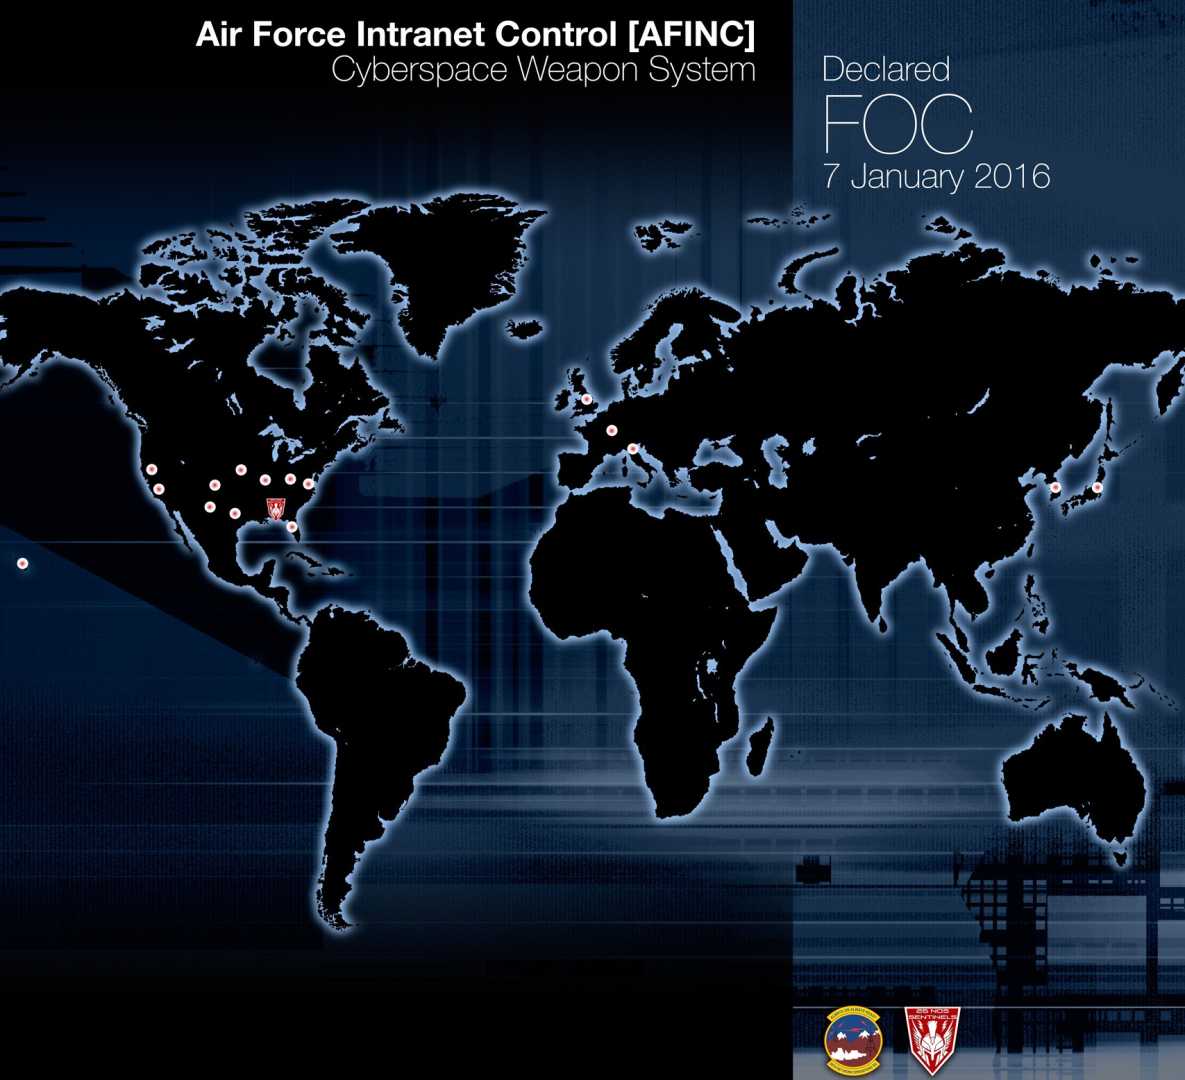 Air Force Intranet Control (AFINC) Cyberspace Weapon System